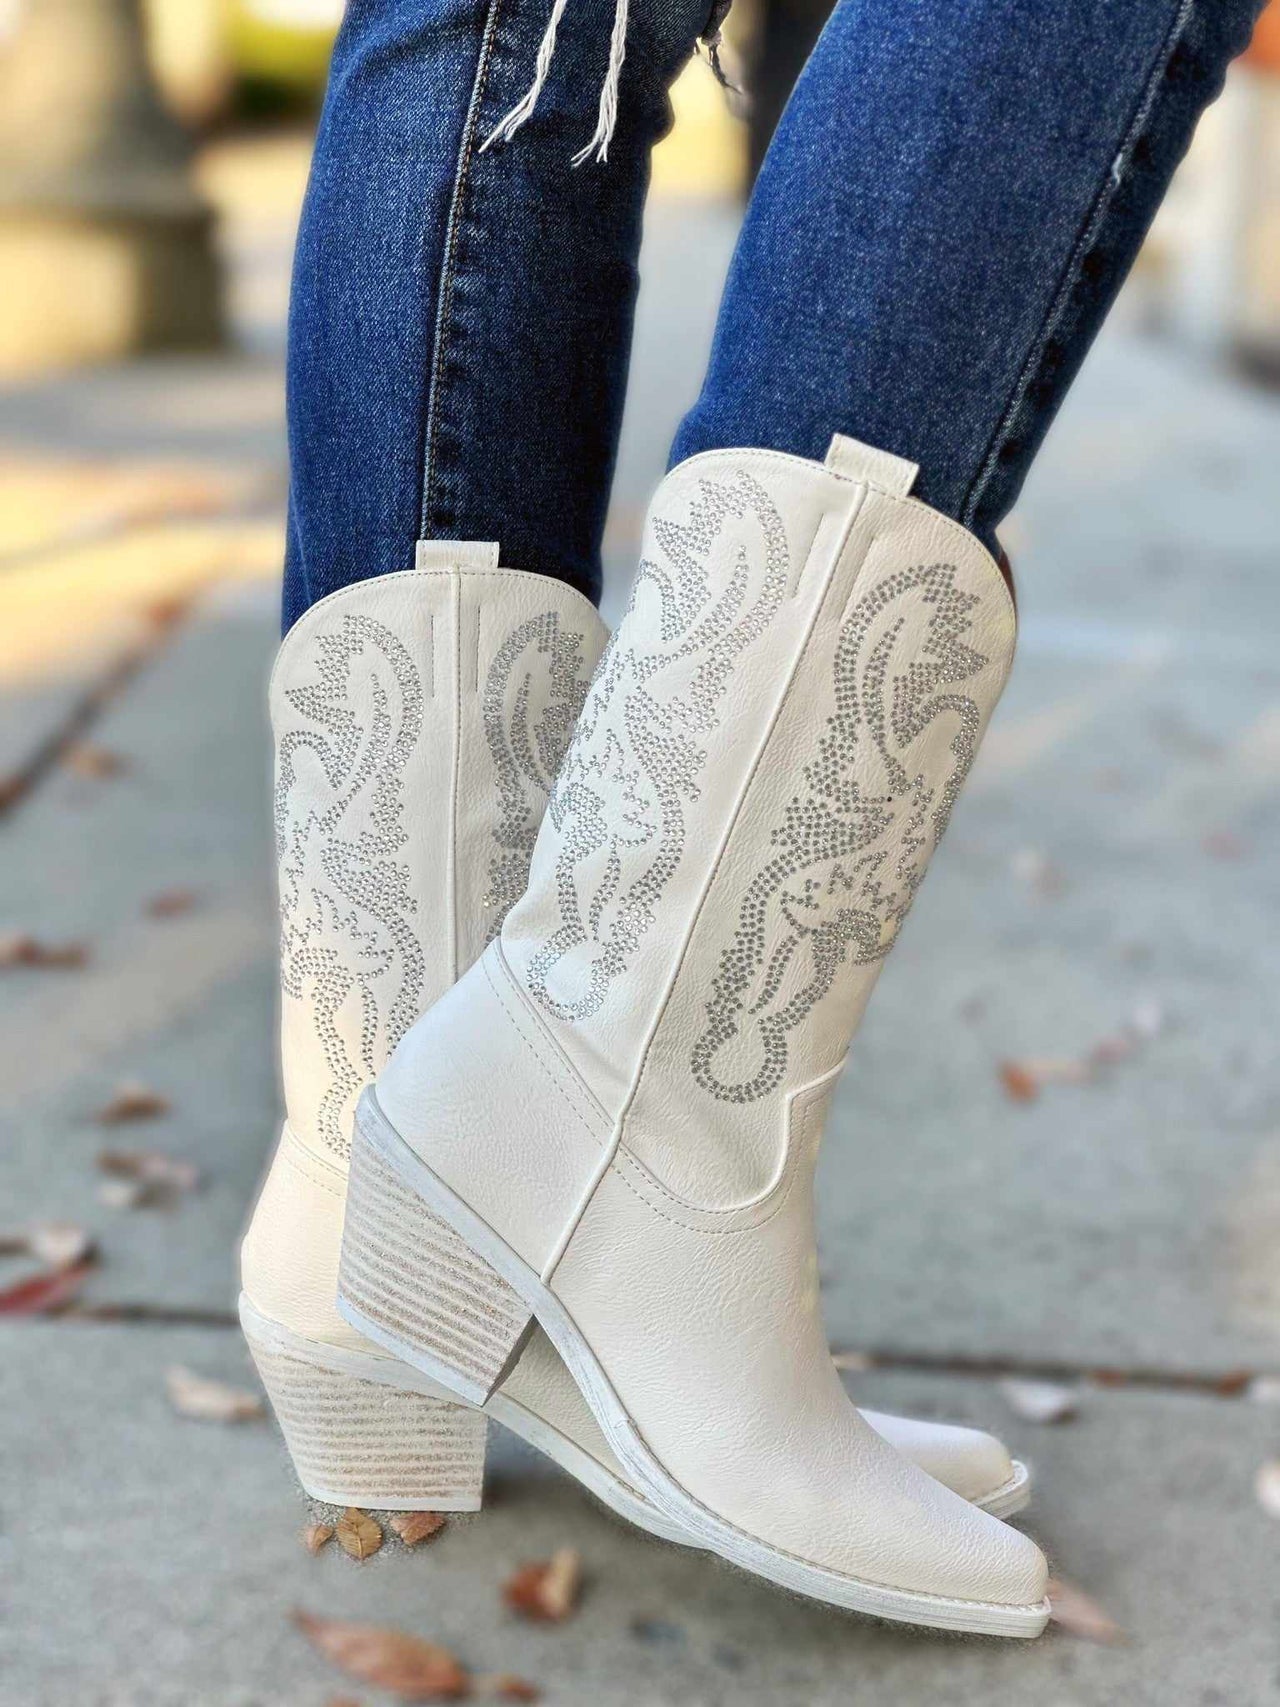 Making A Statement Boot - White